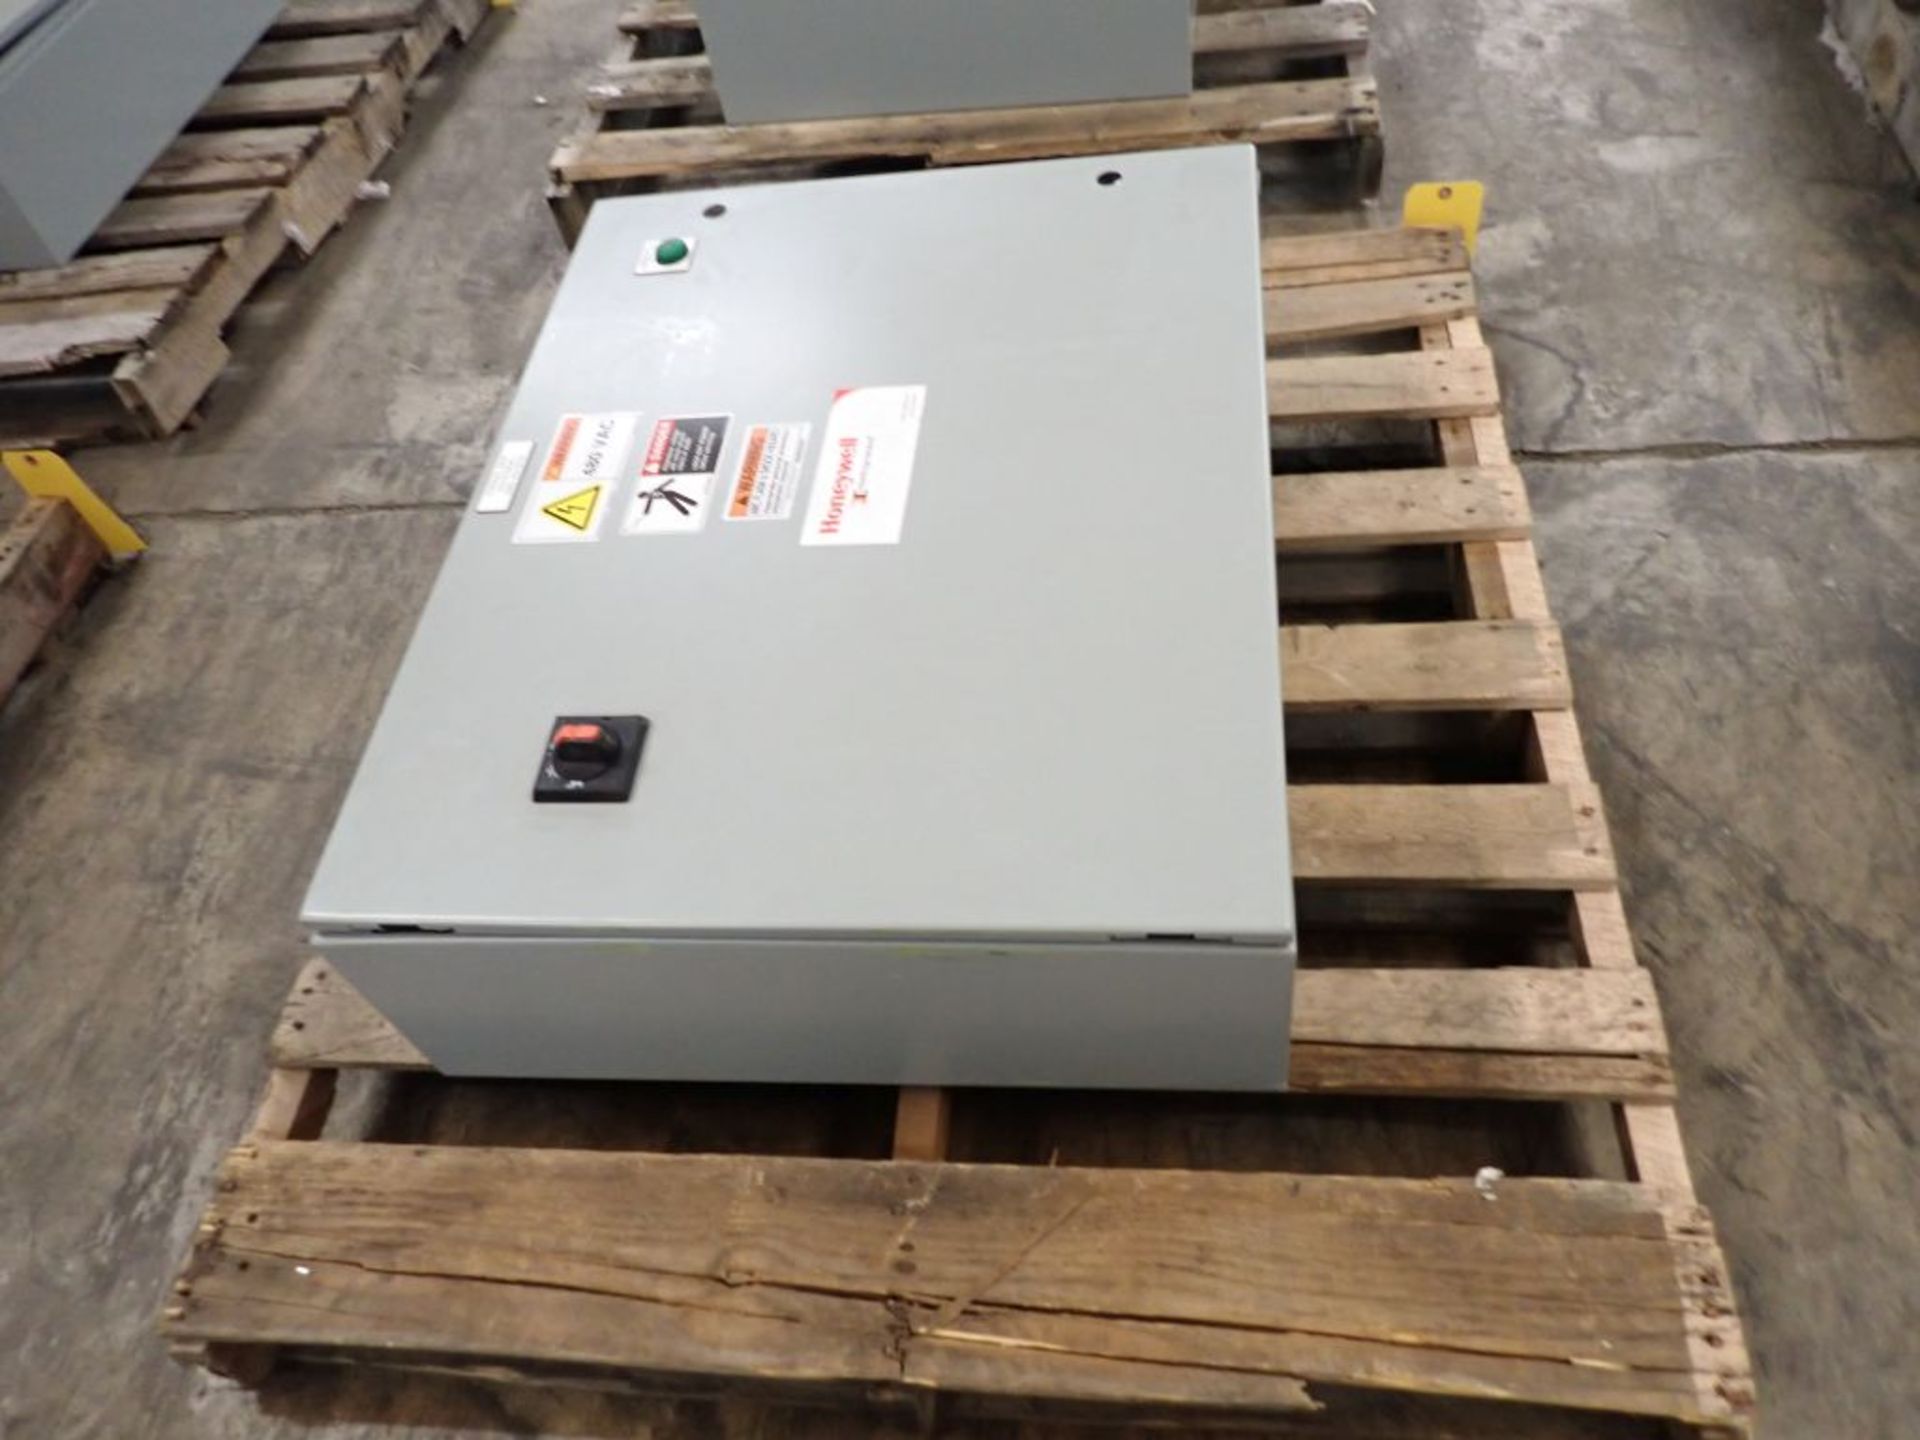 Hoffman Nvent Industrial Control Panel Enclosure with Contents - Image 3 of 11